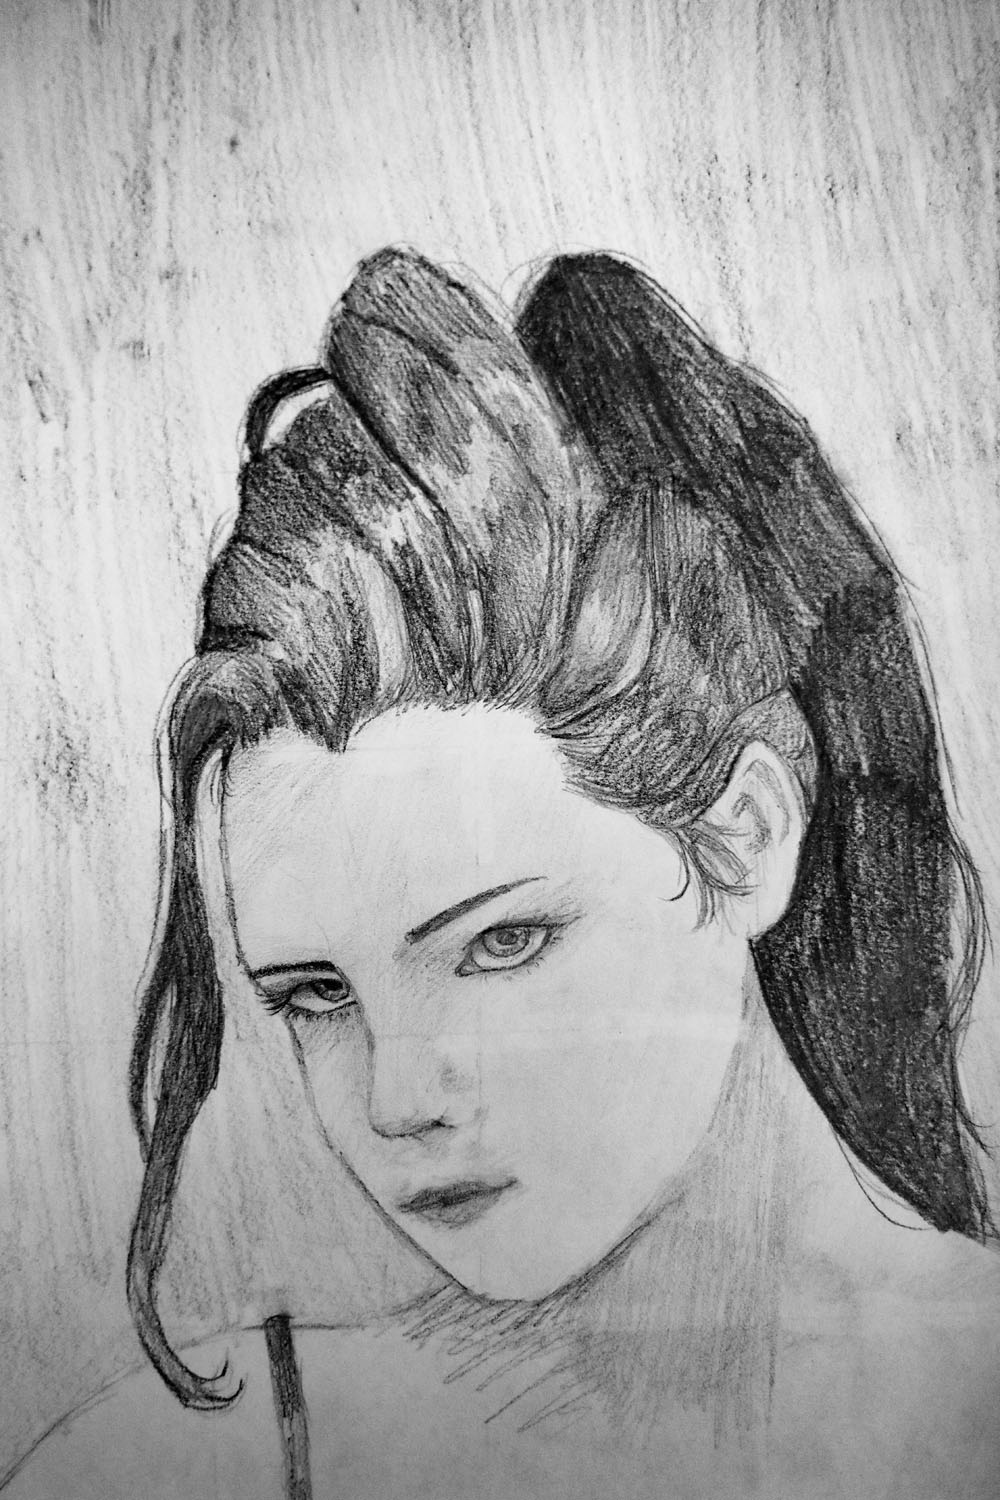 Pencil drawing of a young woman